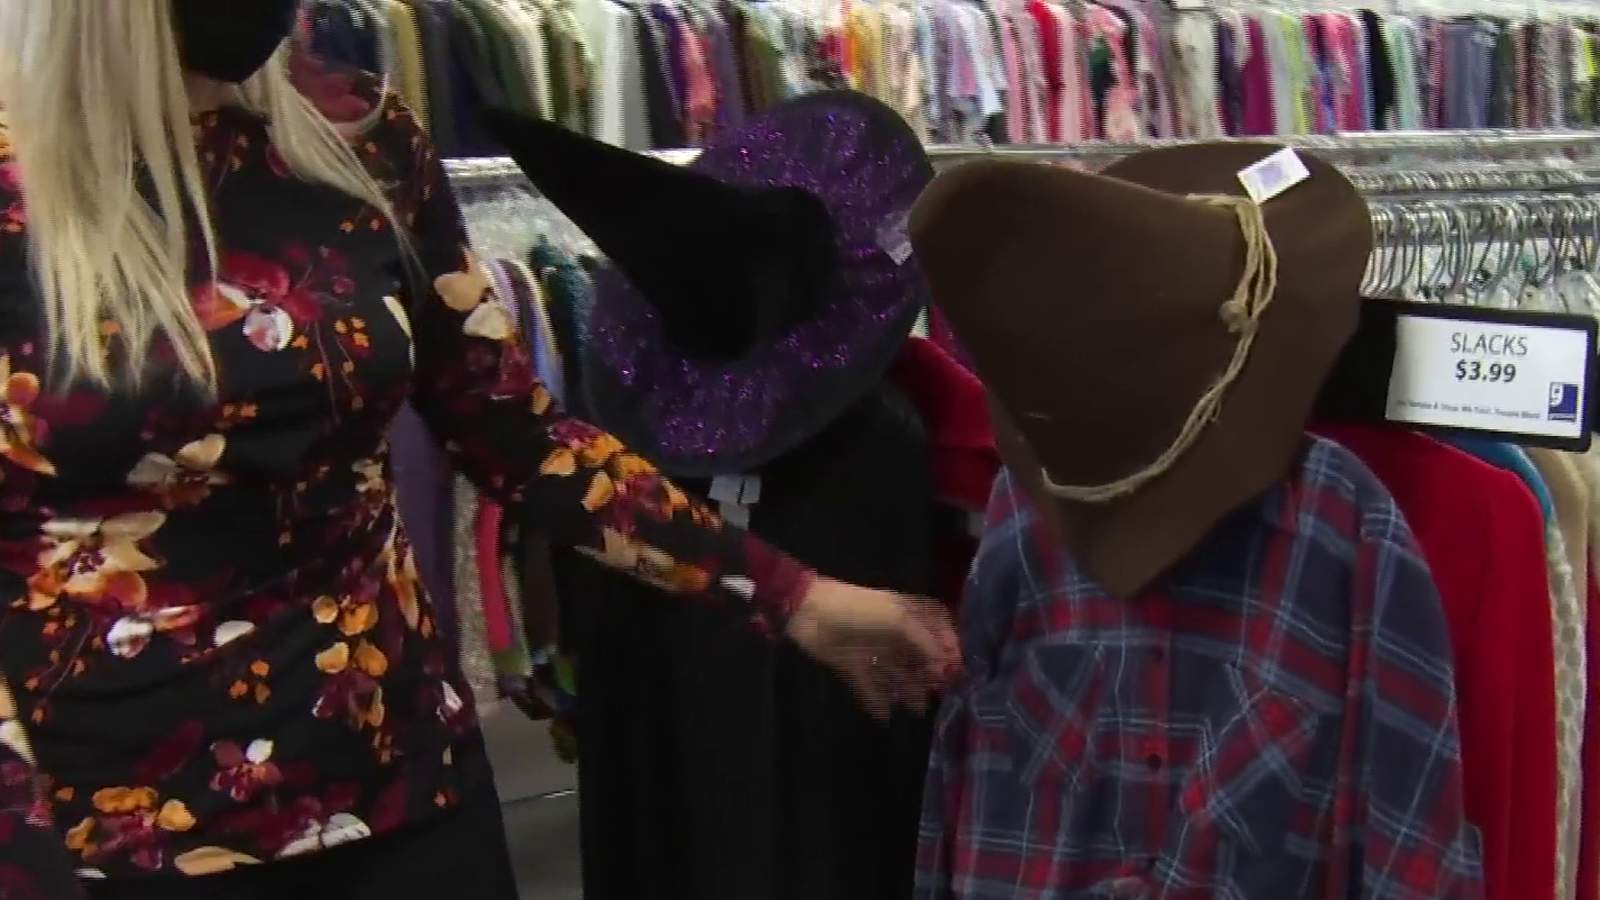 Goodwill stores become DIY Halloween costume headquarters